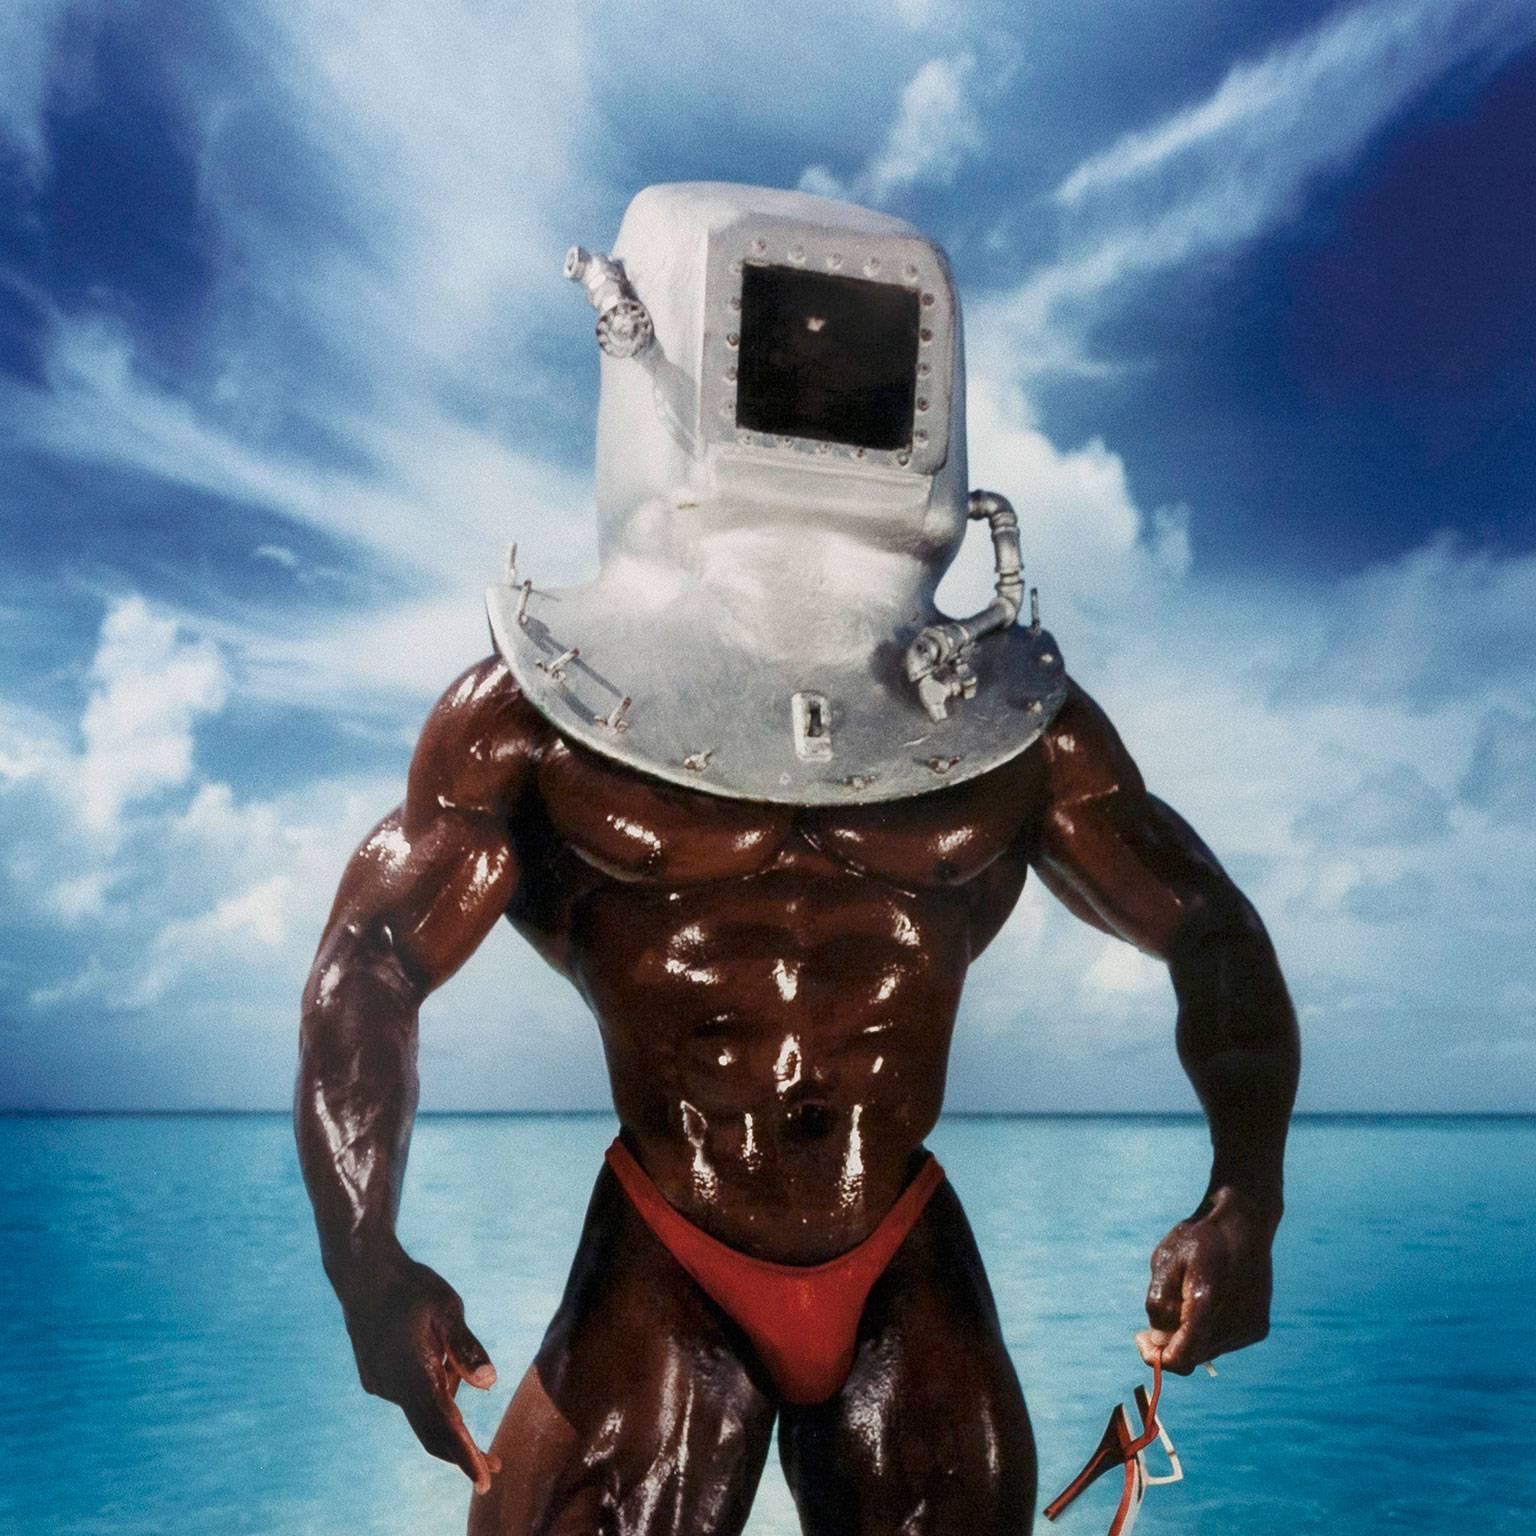 Man With Diving Bell - Gray Color Photograph by David LaChapelle